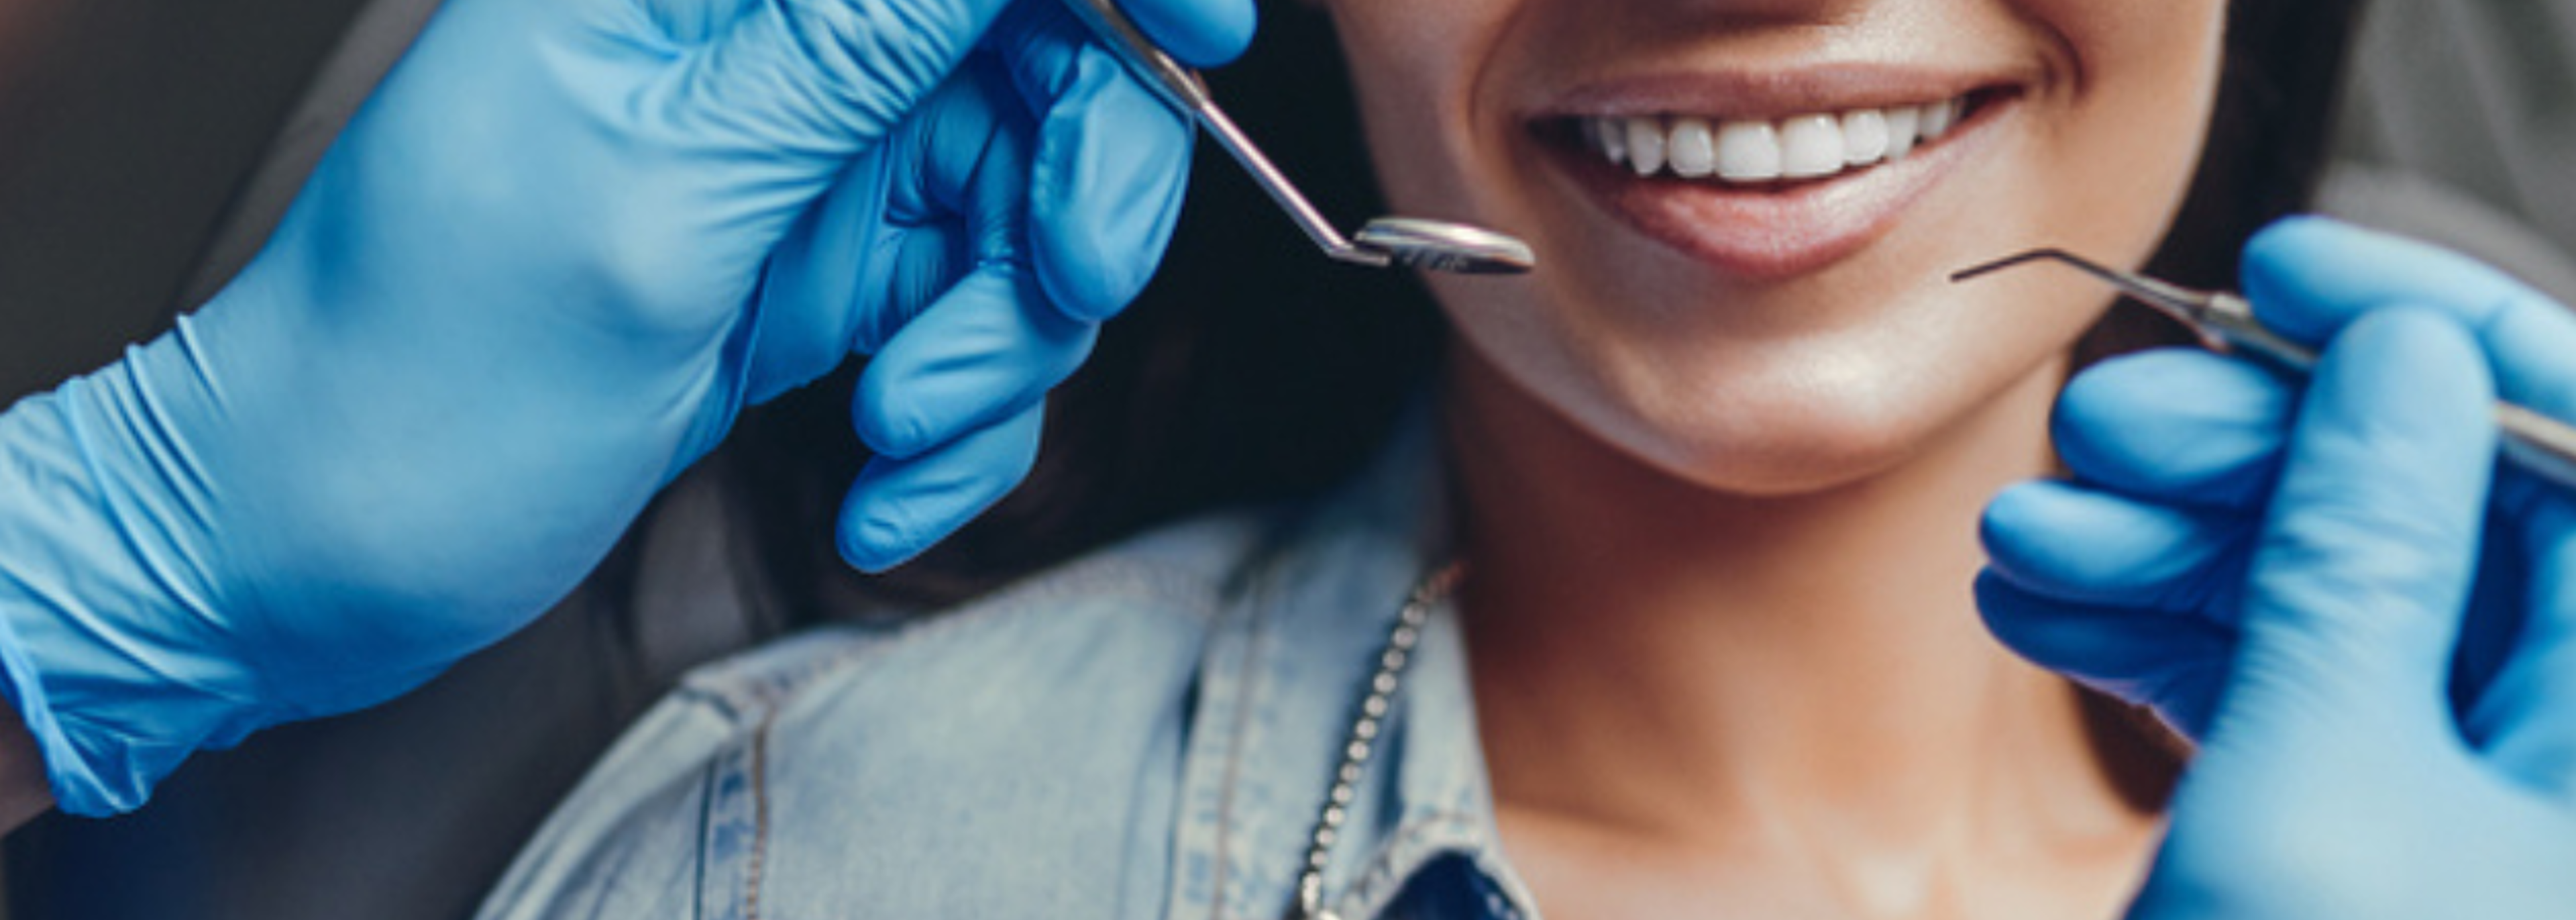 Patient safety could improve as dentists offer cosmetic procedures